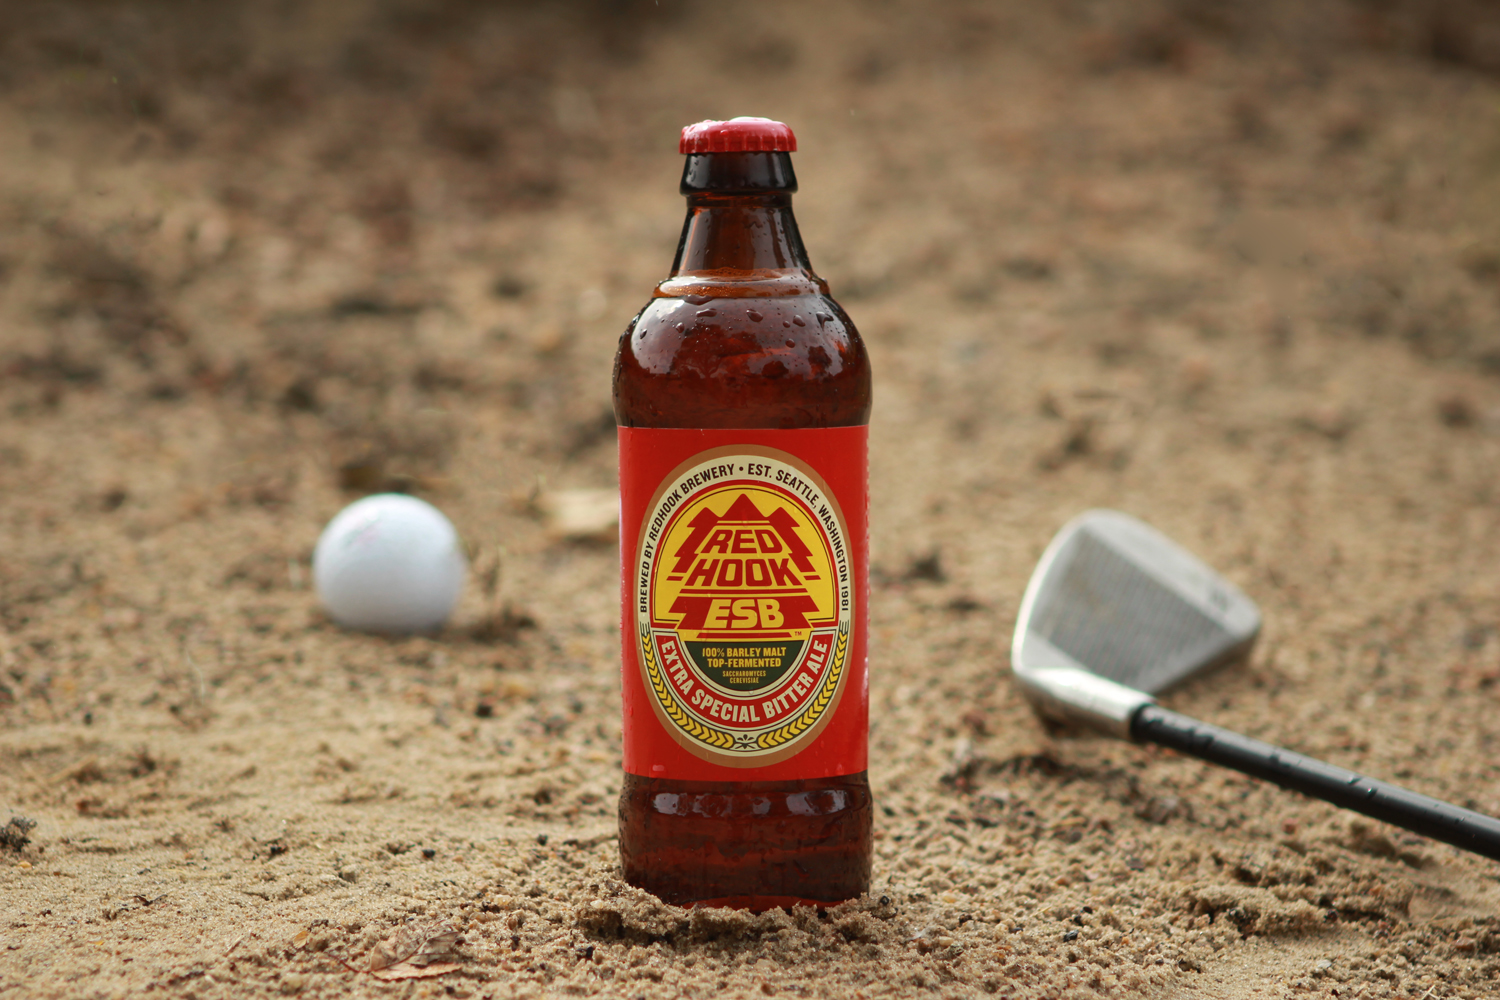 Redhook Extra Special Bitter (ESB) is a summer beer perfect for golf.